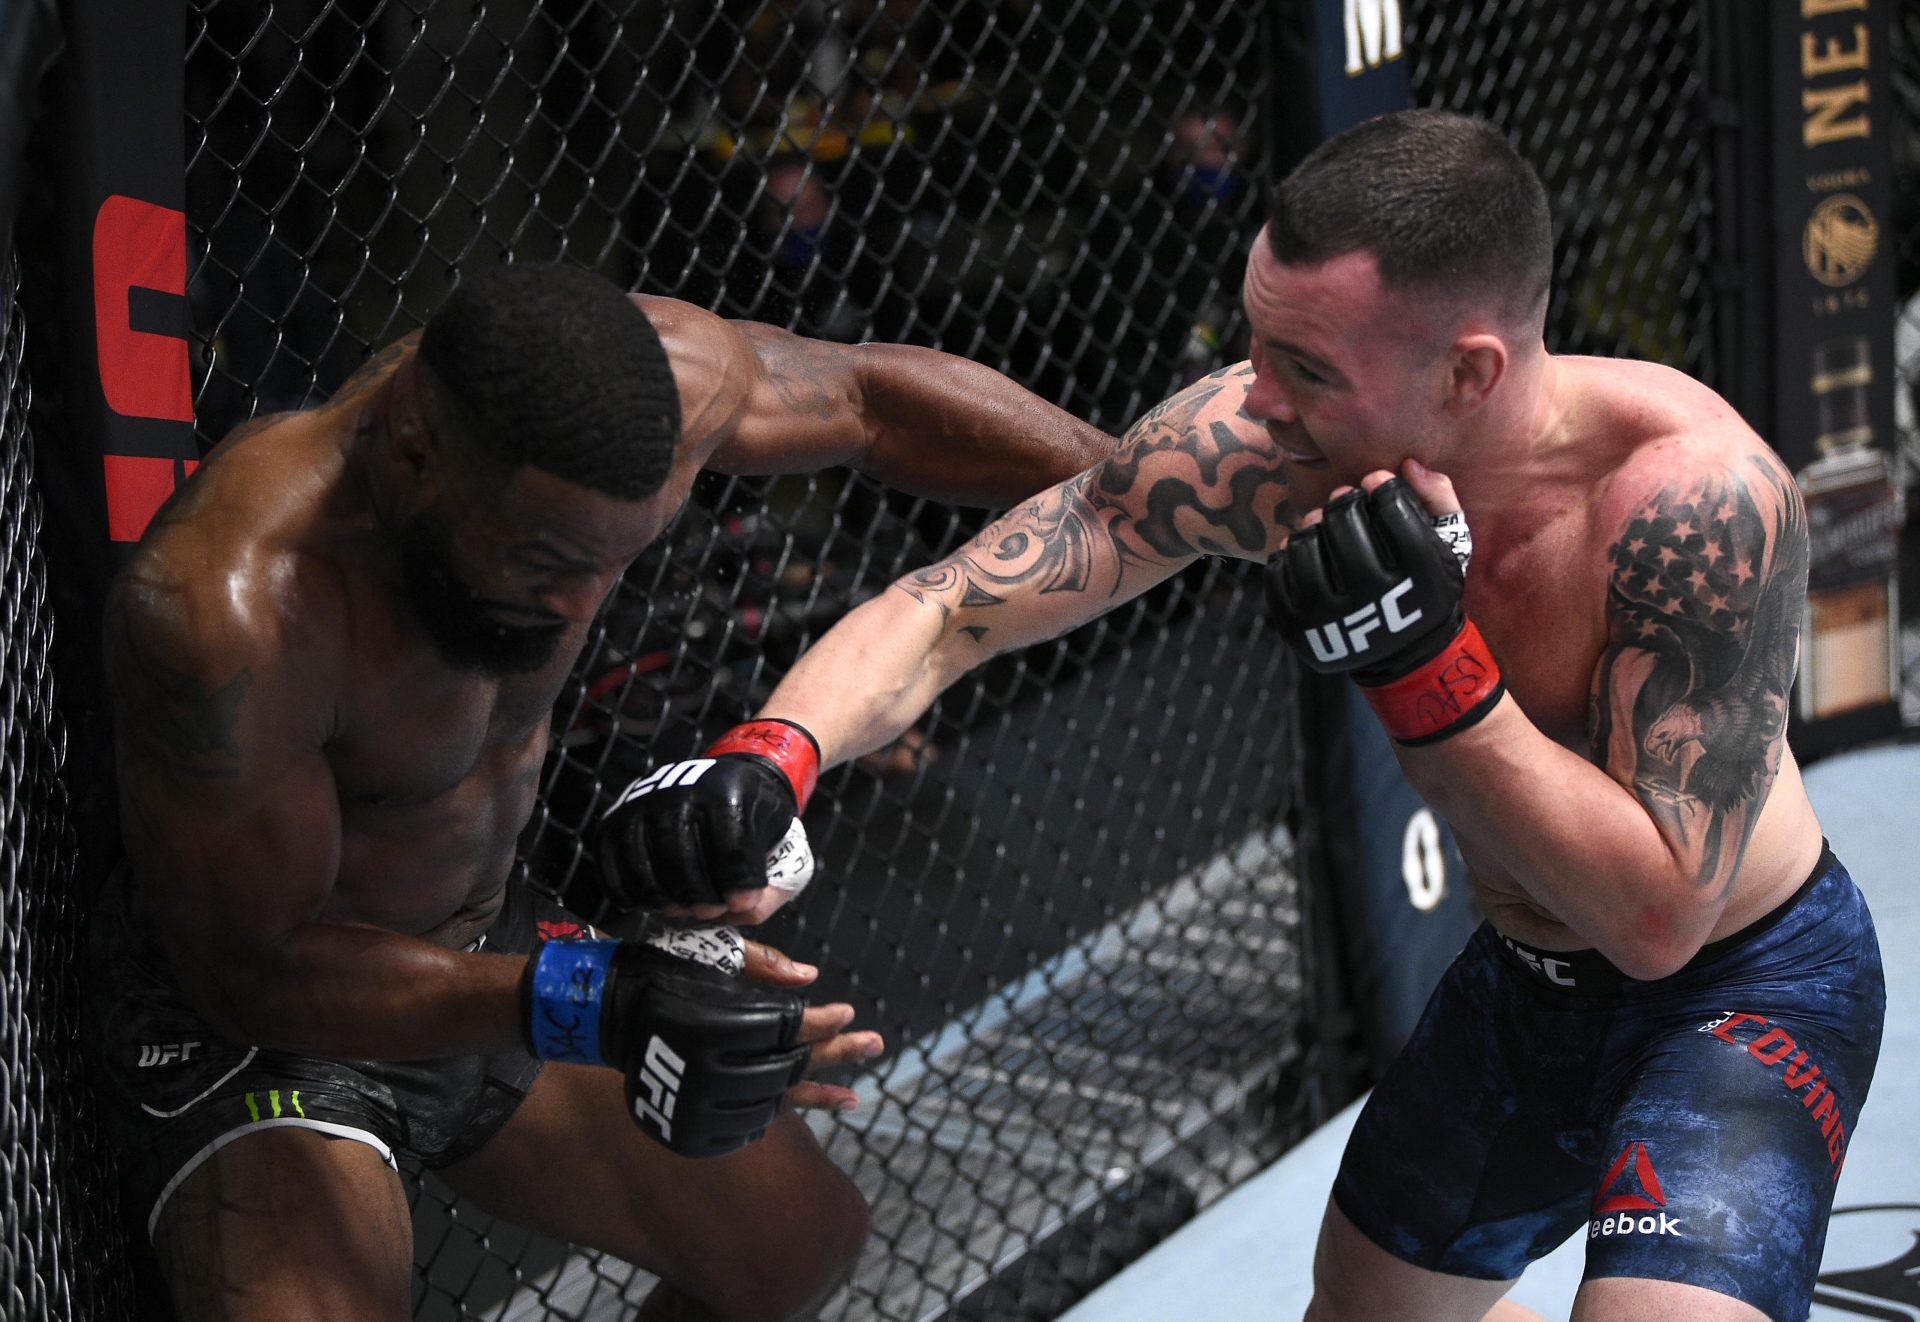 Dana White: Tyron Woodley ‘must always starting up up smitten by inserting it up’ after loss